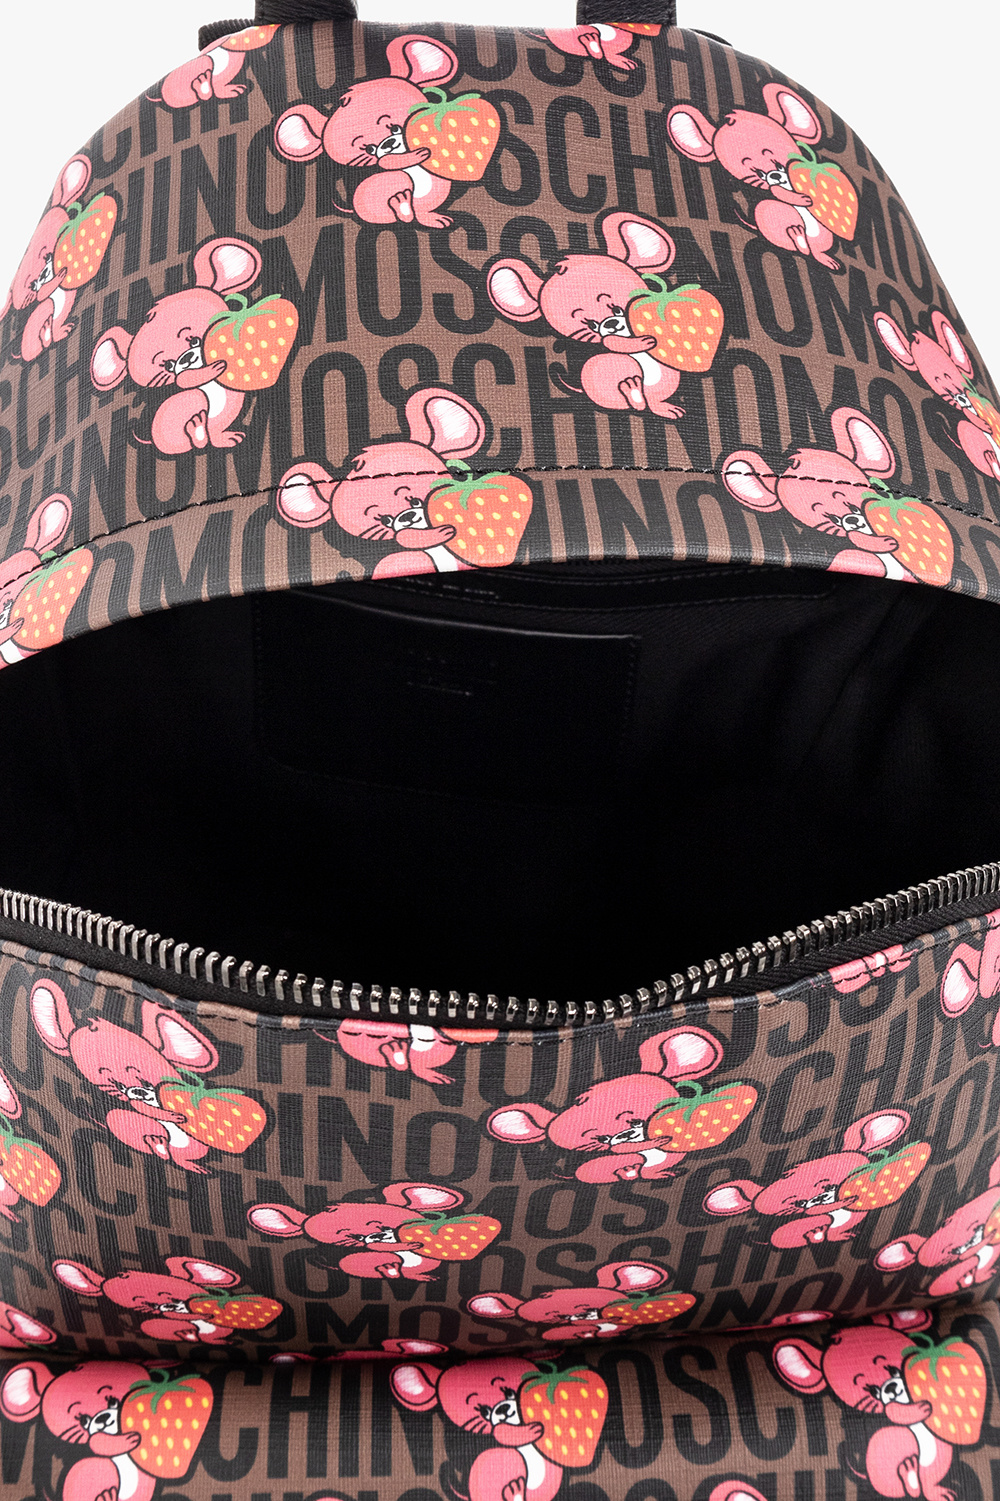 Moschino Patterned backpack